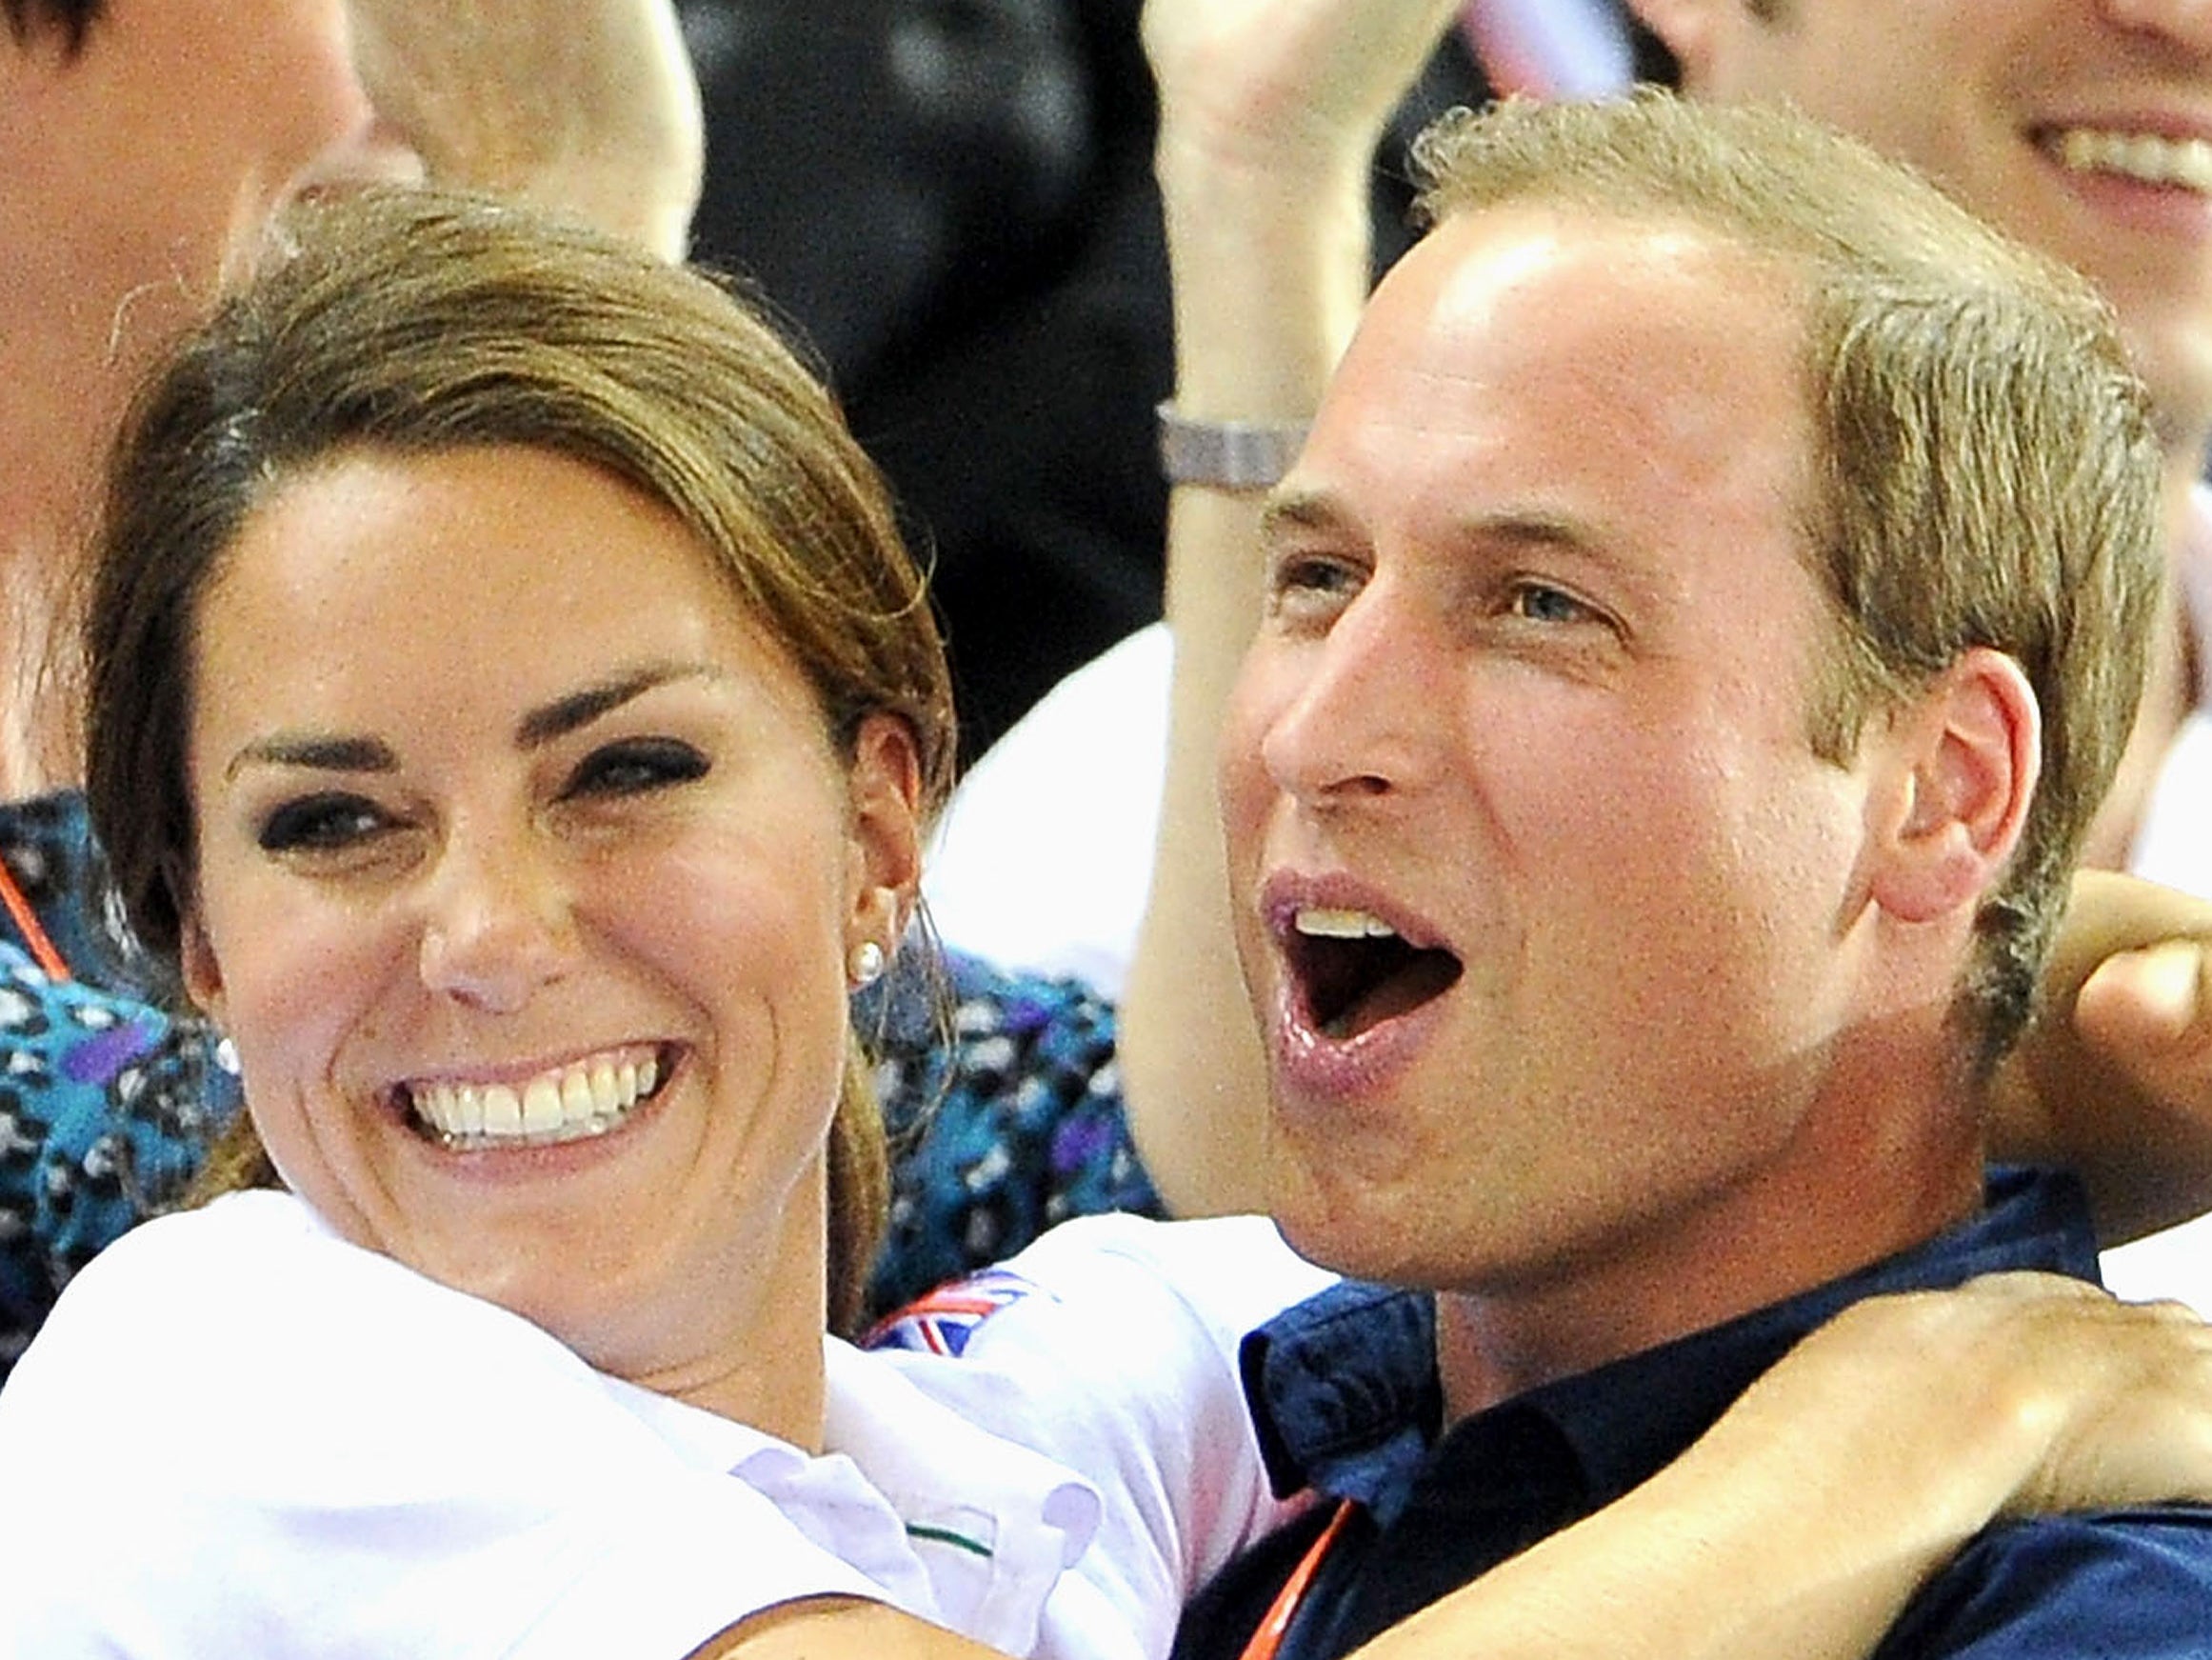 Prince William and Kate Middleton at the London 2012 Olympics